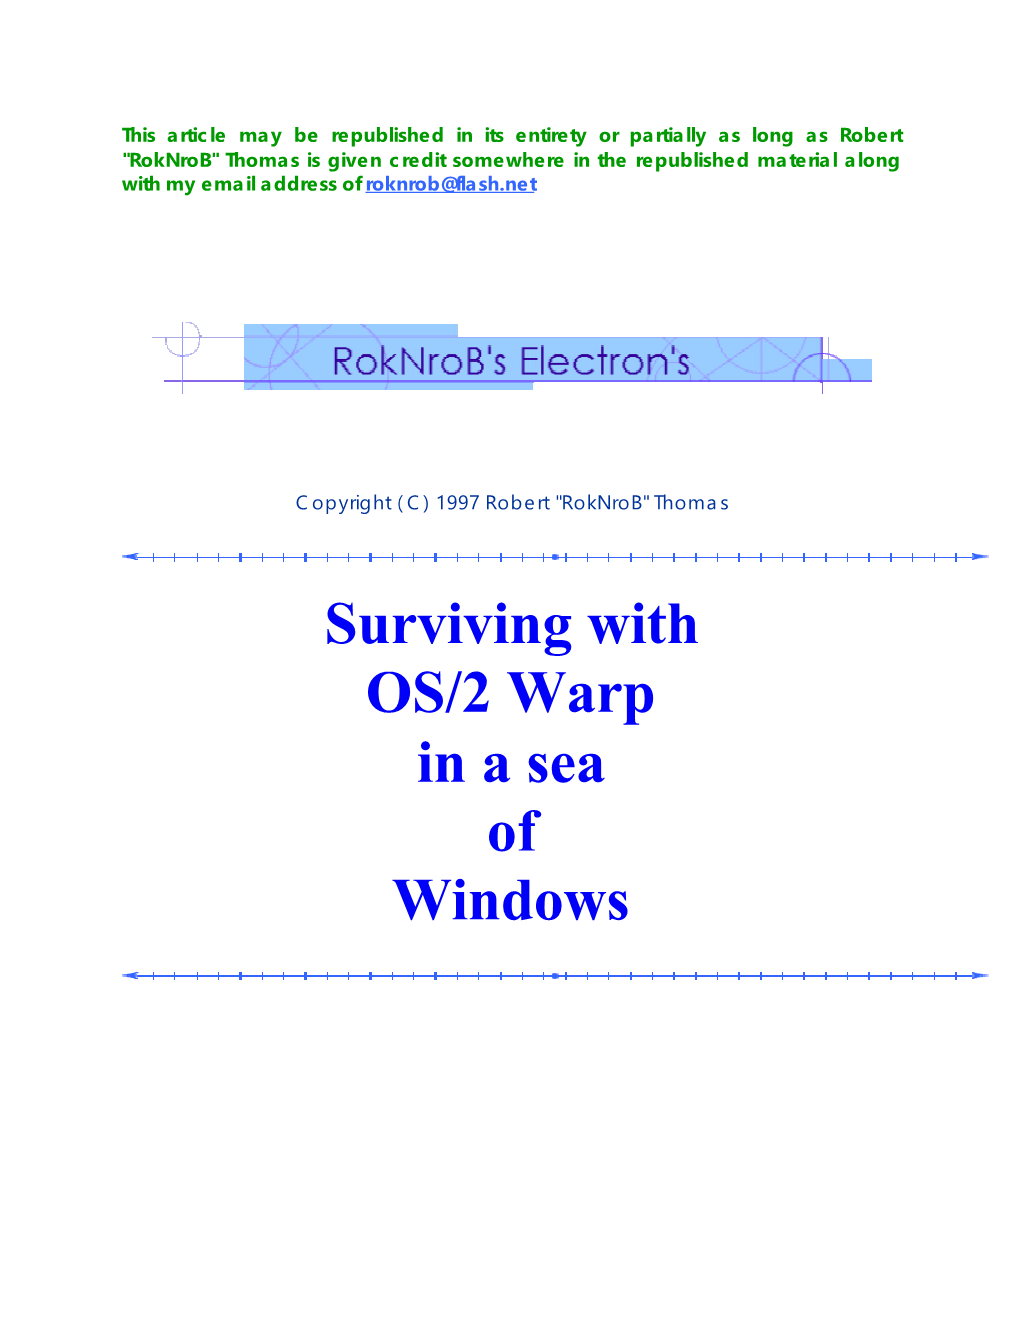 Surviving with OS/2 Warp in a Sea of Windows